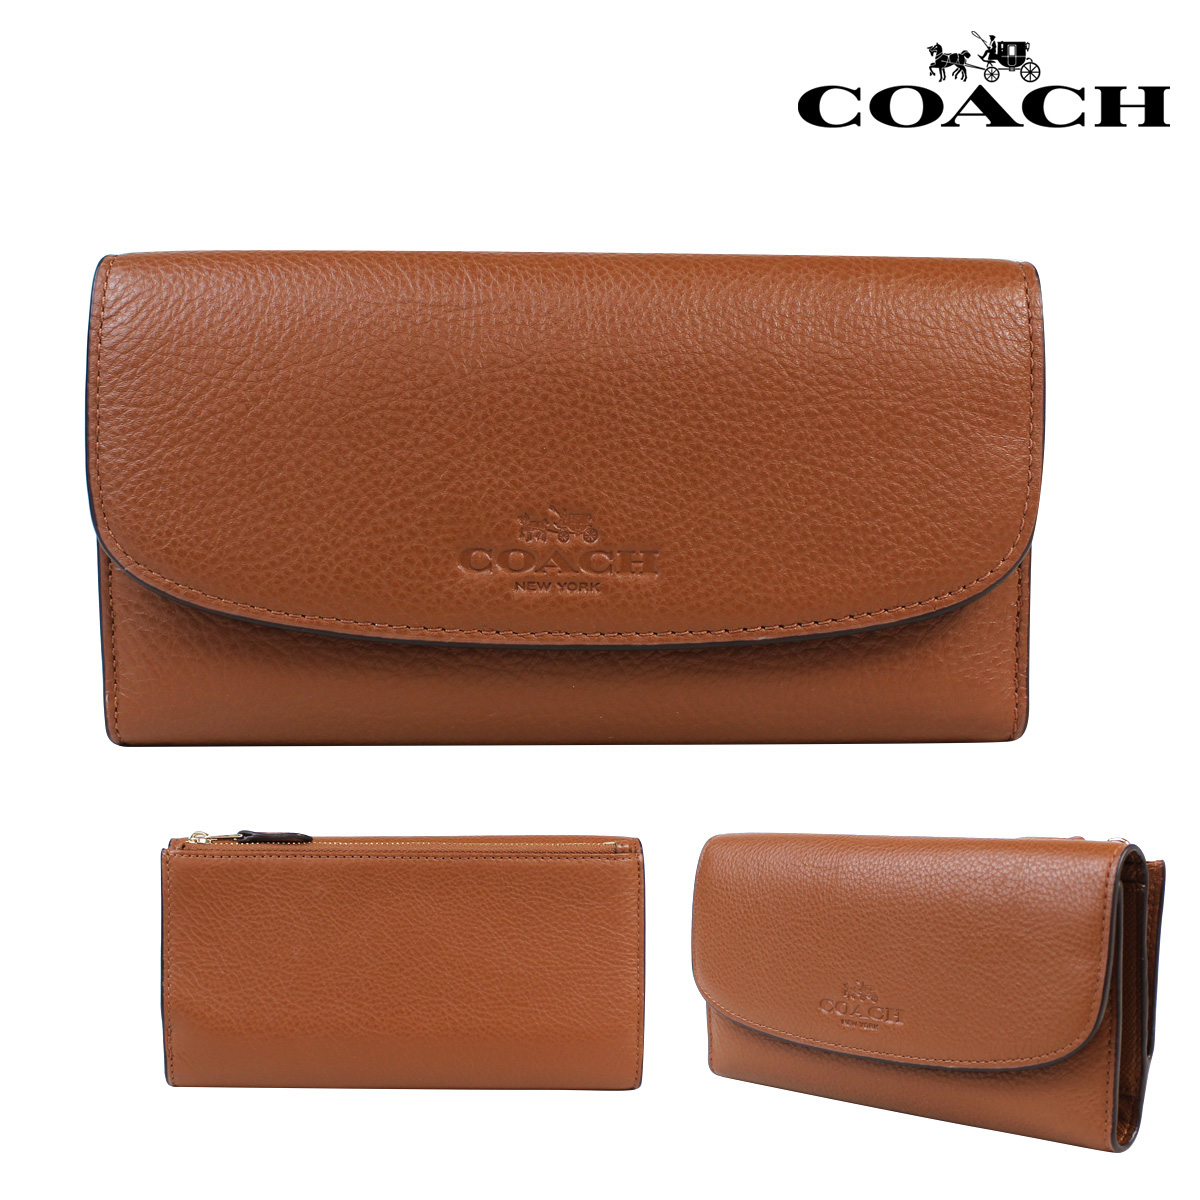 ALLSPORTS: Coach COACH wallets purse ladies F52715 saddle pebbled leather checkbook wallet ...